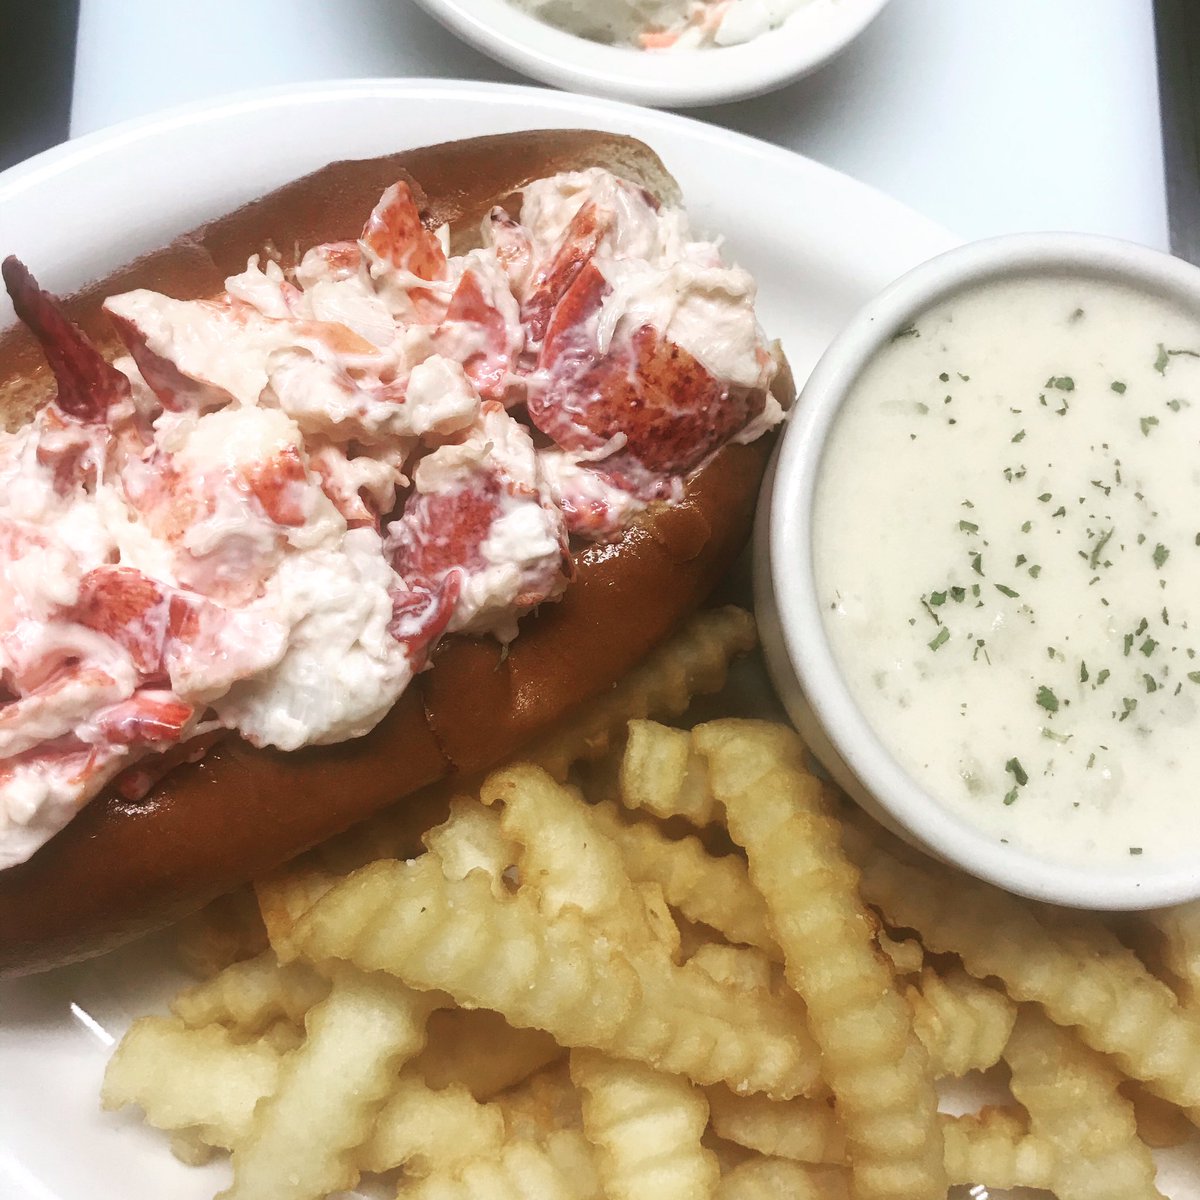 Happy Friday everyone. Today’s specials are lobster roll with homemade haddock chowder, coleslaw and fries. Don’t miss out on this special, it sold out fast last week. Order online stationgrillrestaurant.com #mainerestaurants #lewistonrestaurants #auburnrestaurant #mainerestaurants